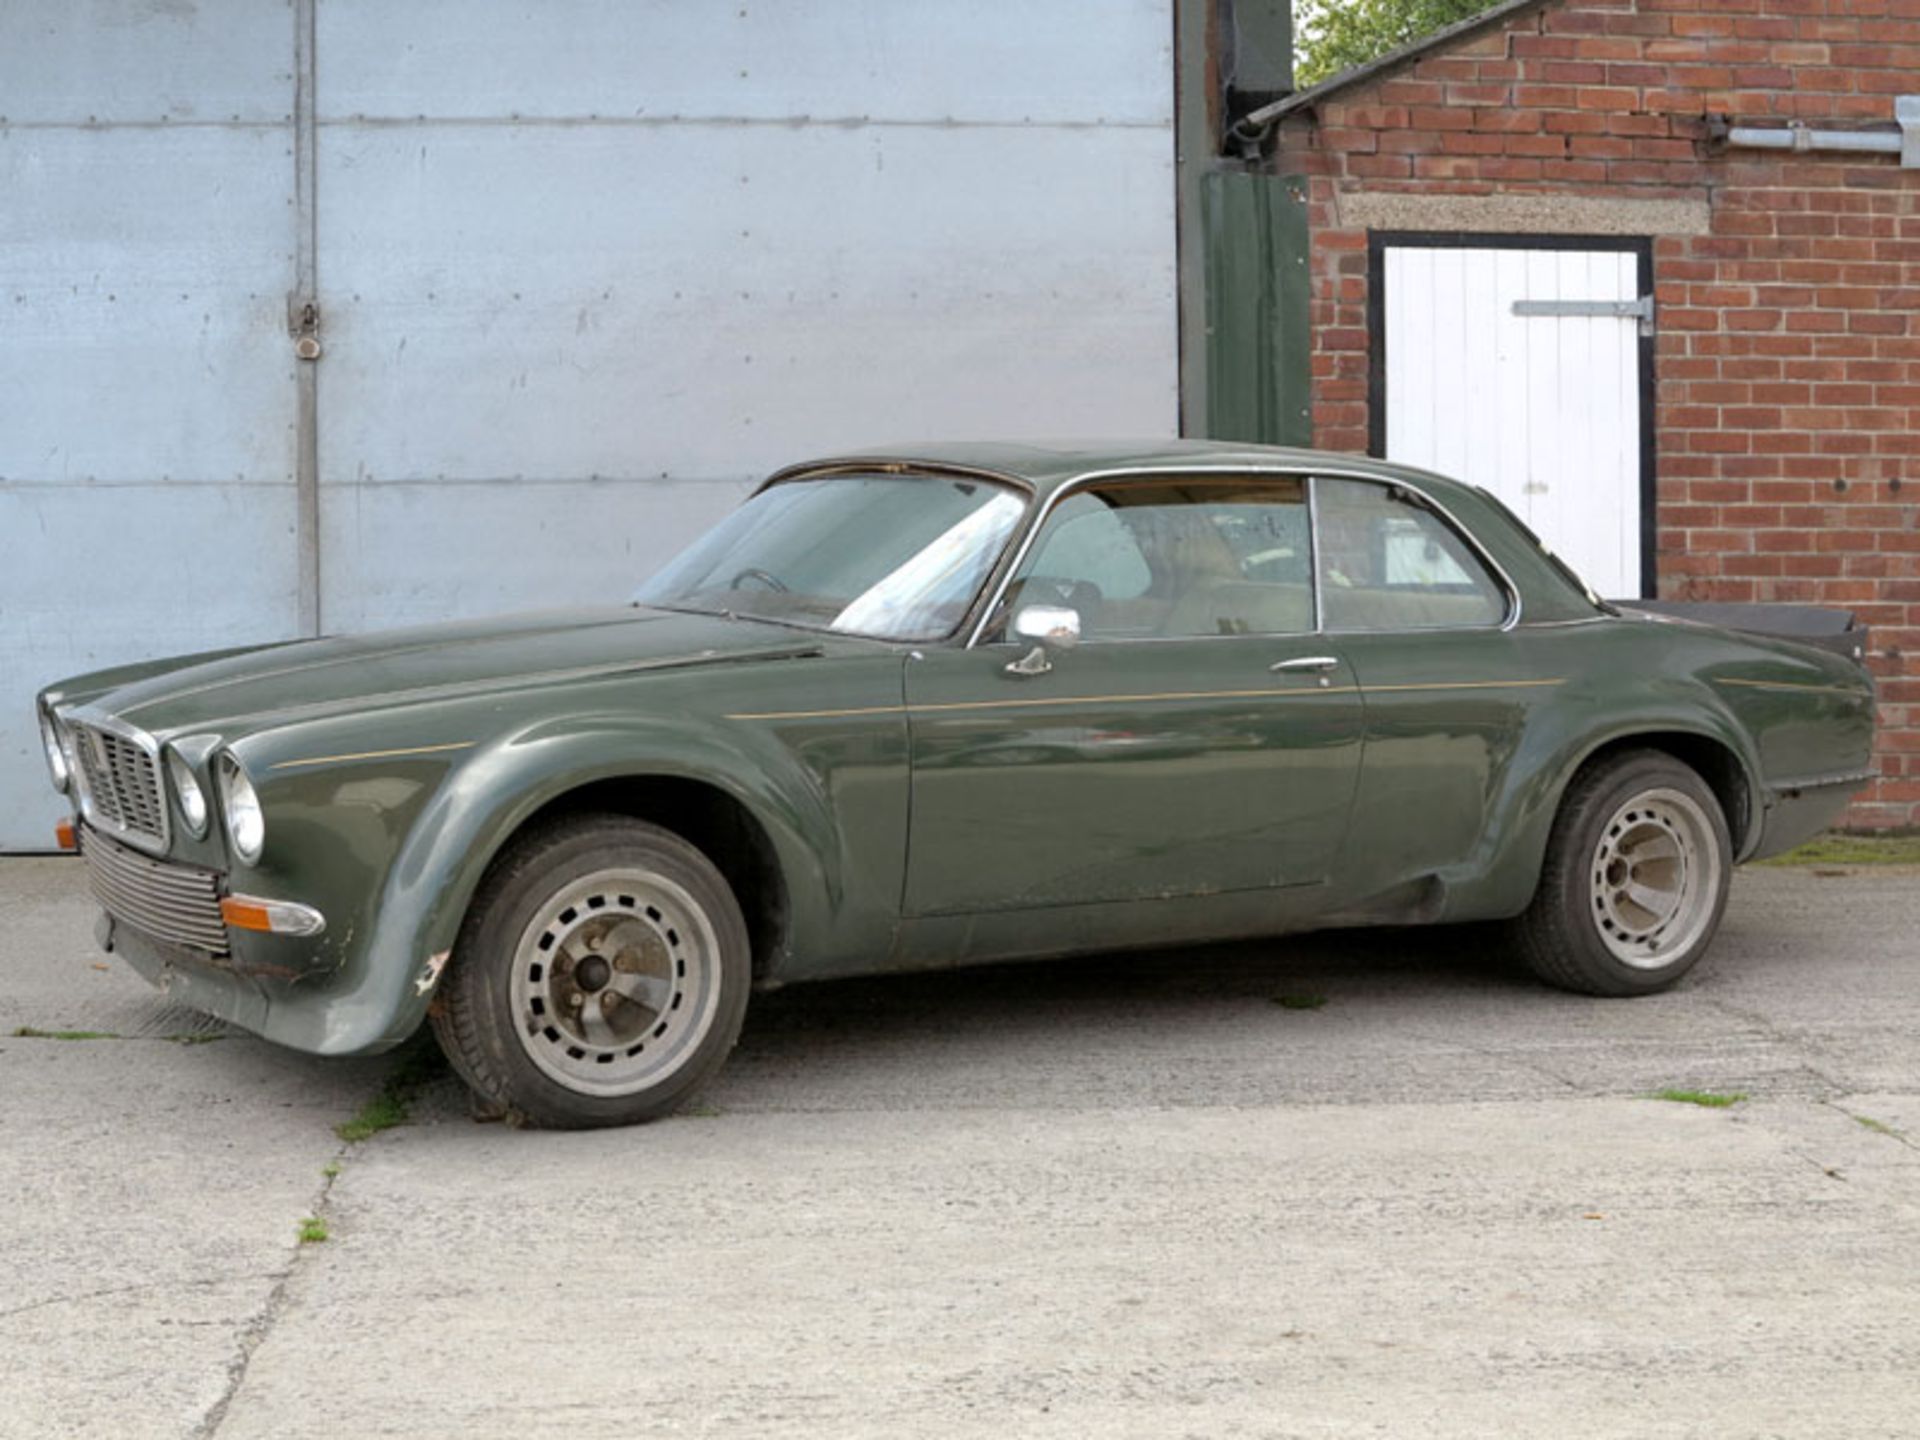 - John Steed's famous mount in 'The New Avengers' TV series

- The eighth XJ-C 12 made and - Image 3 of 12